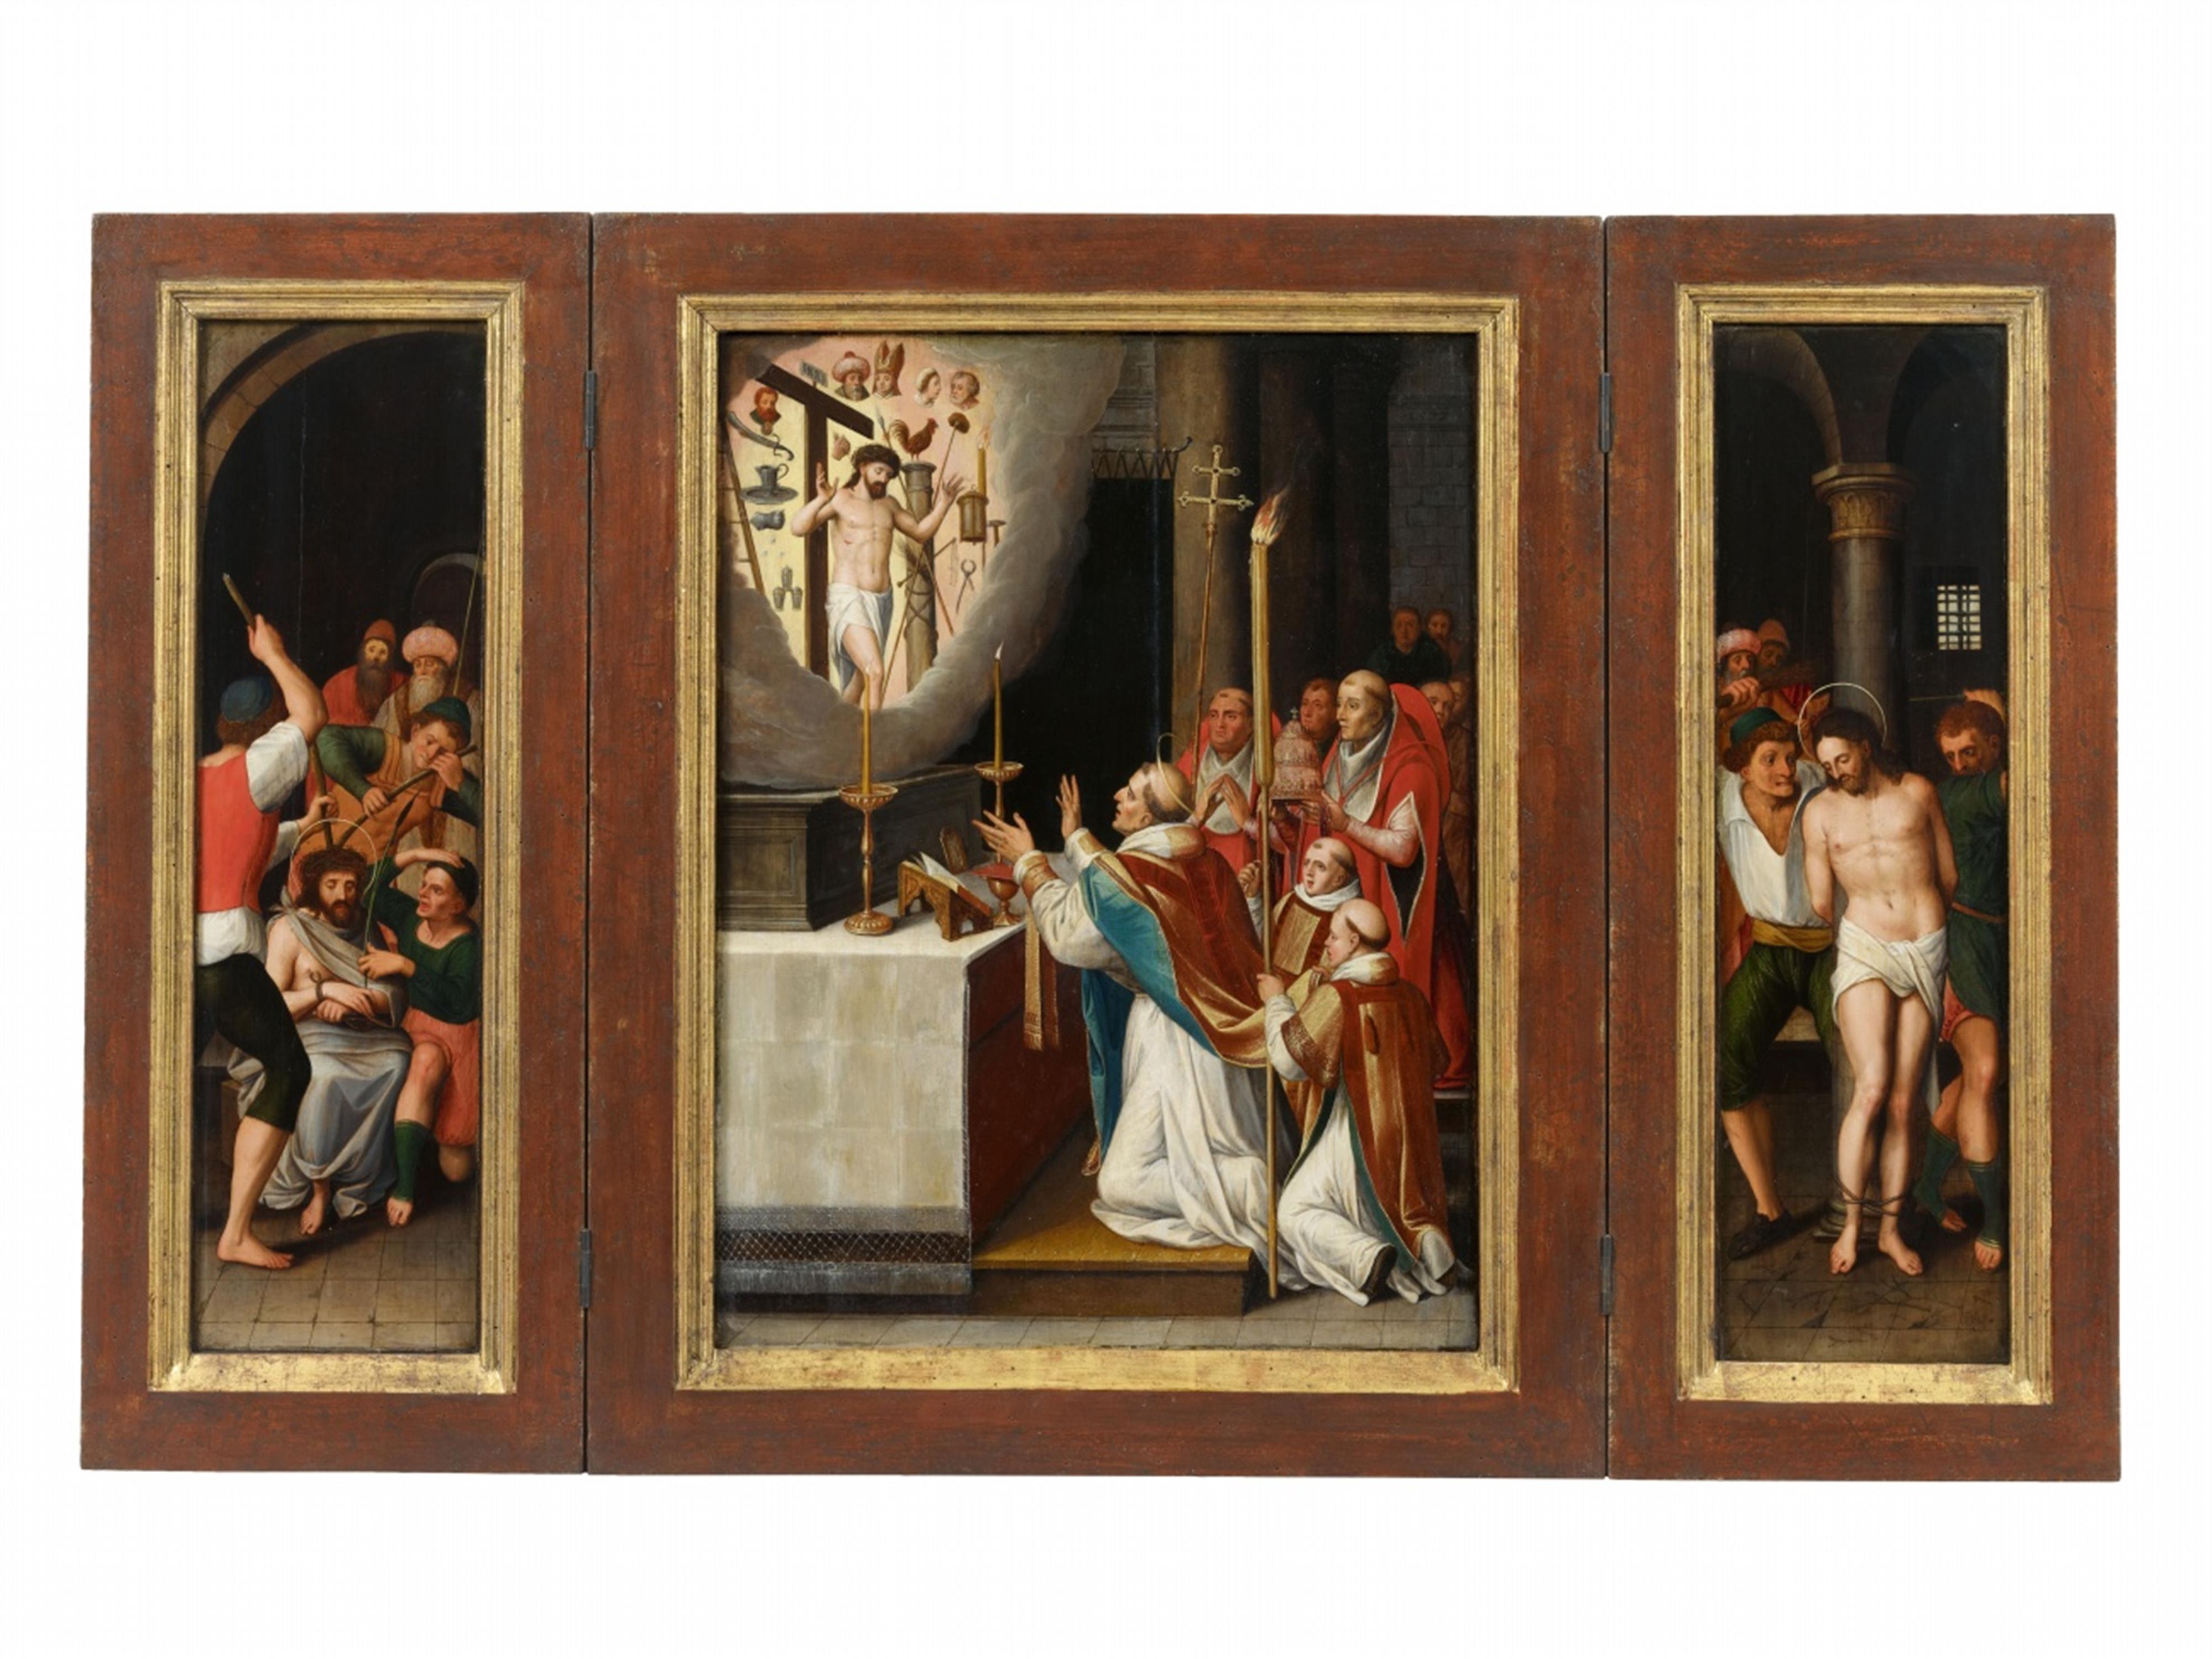 Flemish School, ca. 1577 - Altarpiece with the Mass of St. Gregory, Christ Crowned with Thorns, and Christ at the Column - image-1